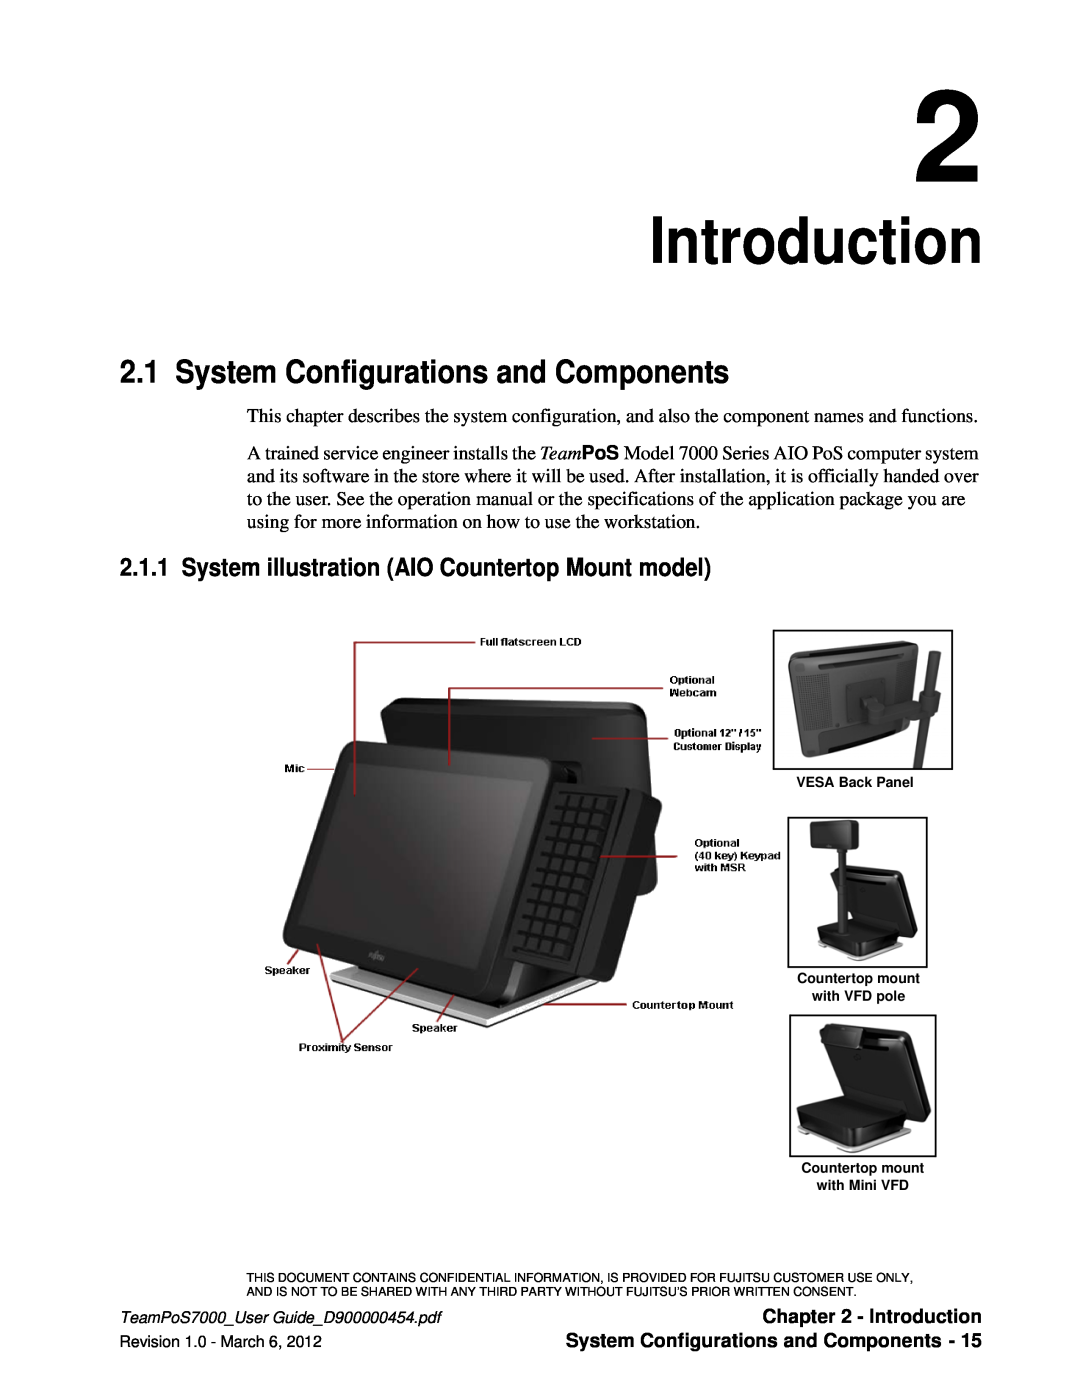 Fujitsu 7000 manual Introduction, System Configurations and Components, System illustration AIO Countertop Mount model 